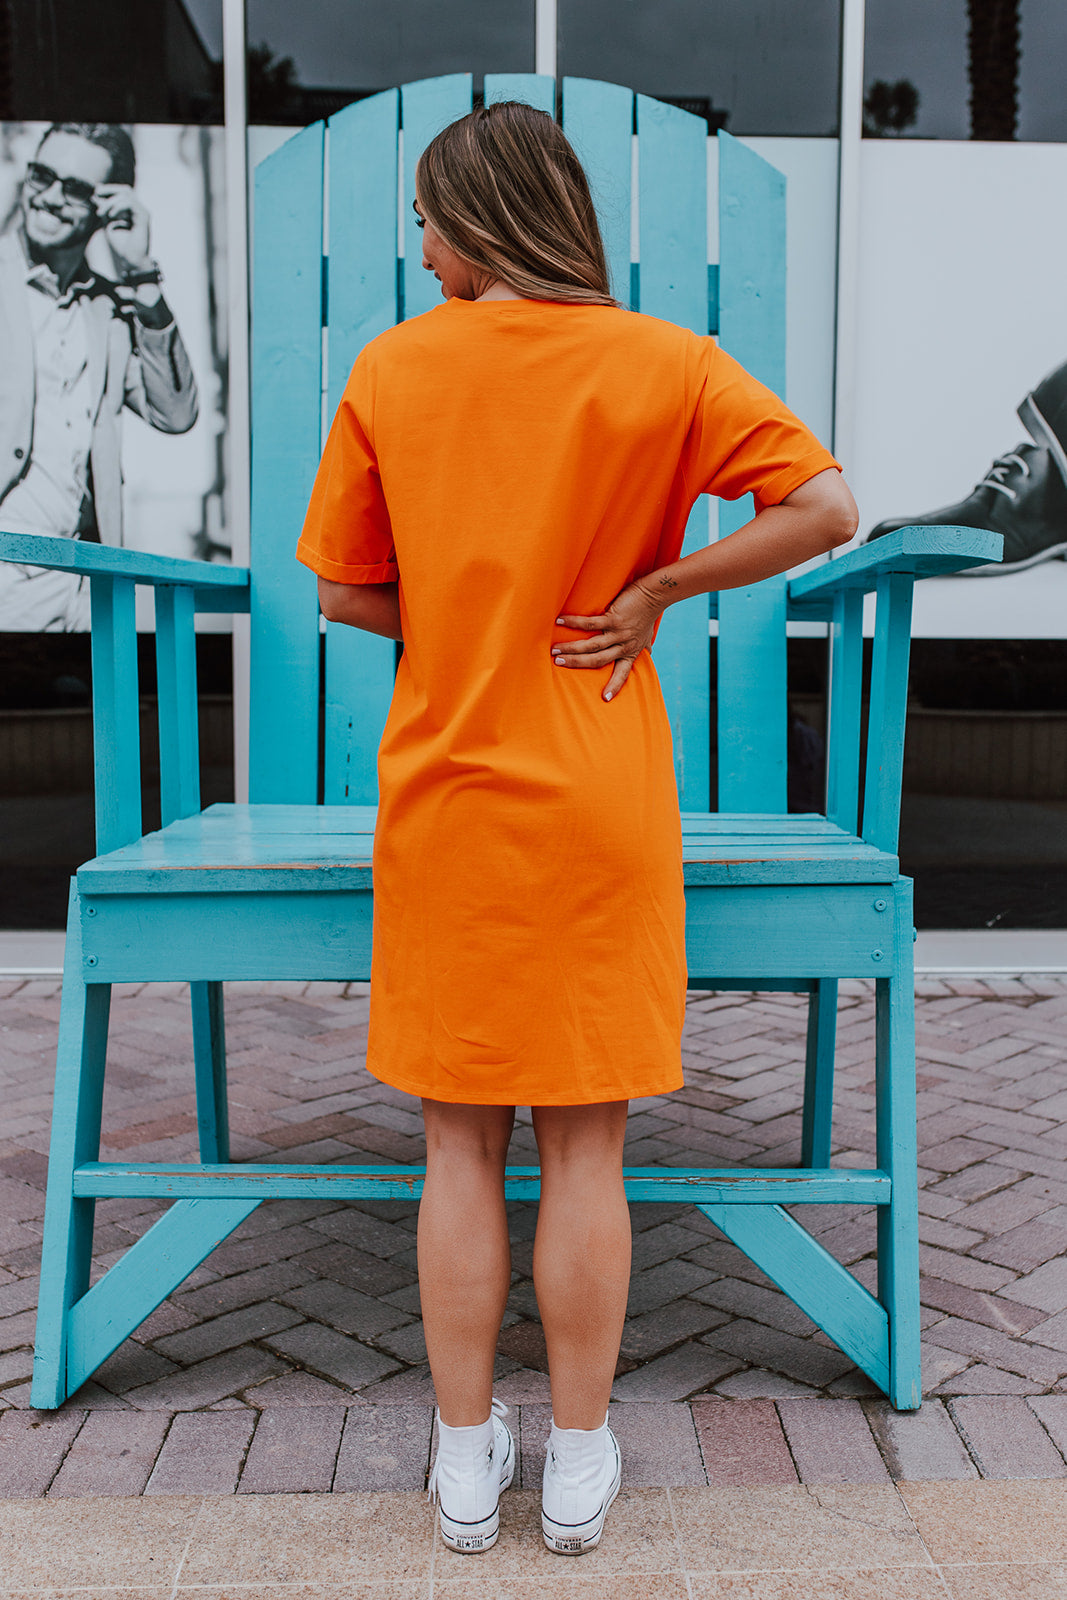 THE EASY DOES IT POCKET T-SHIRT DRESS BY PINK DESERT IN ORANGE